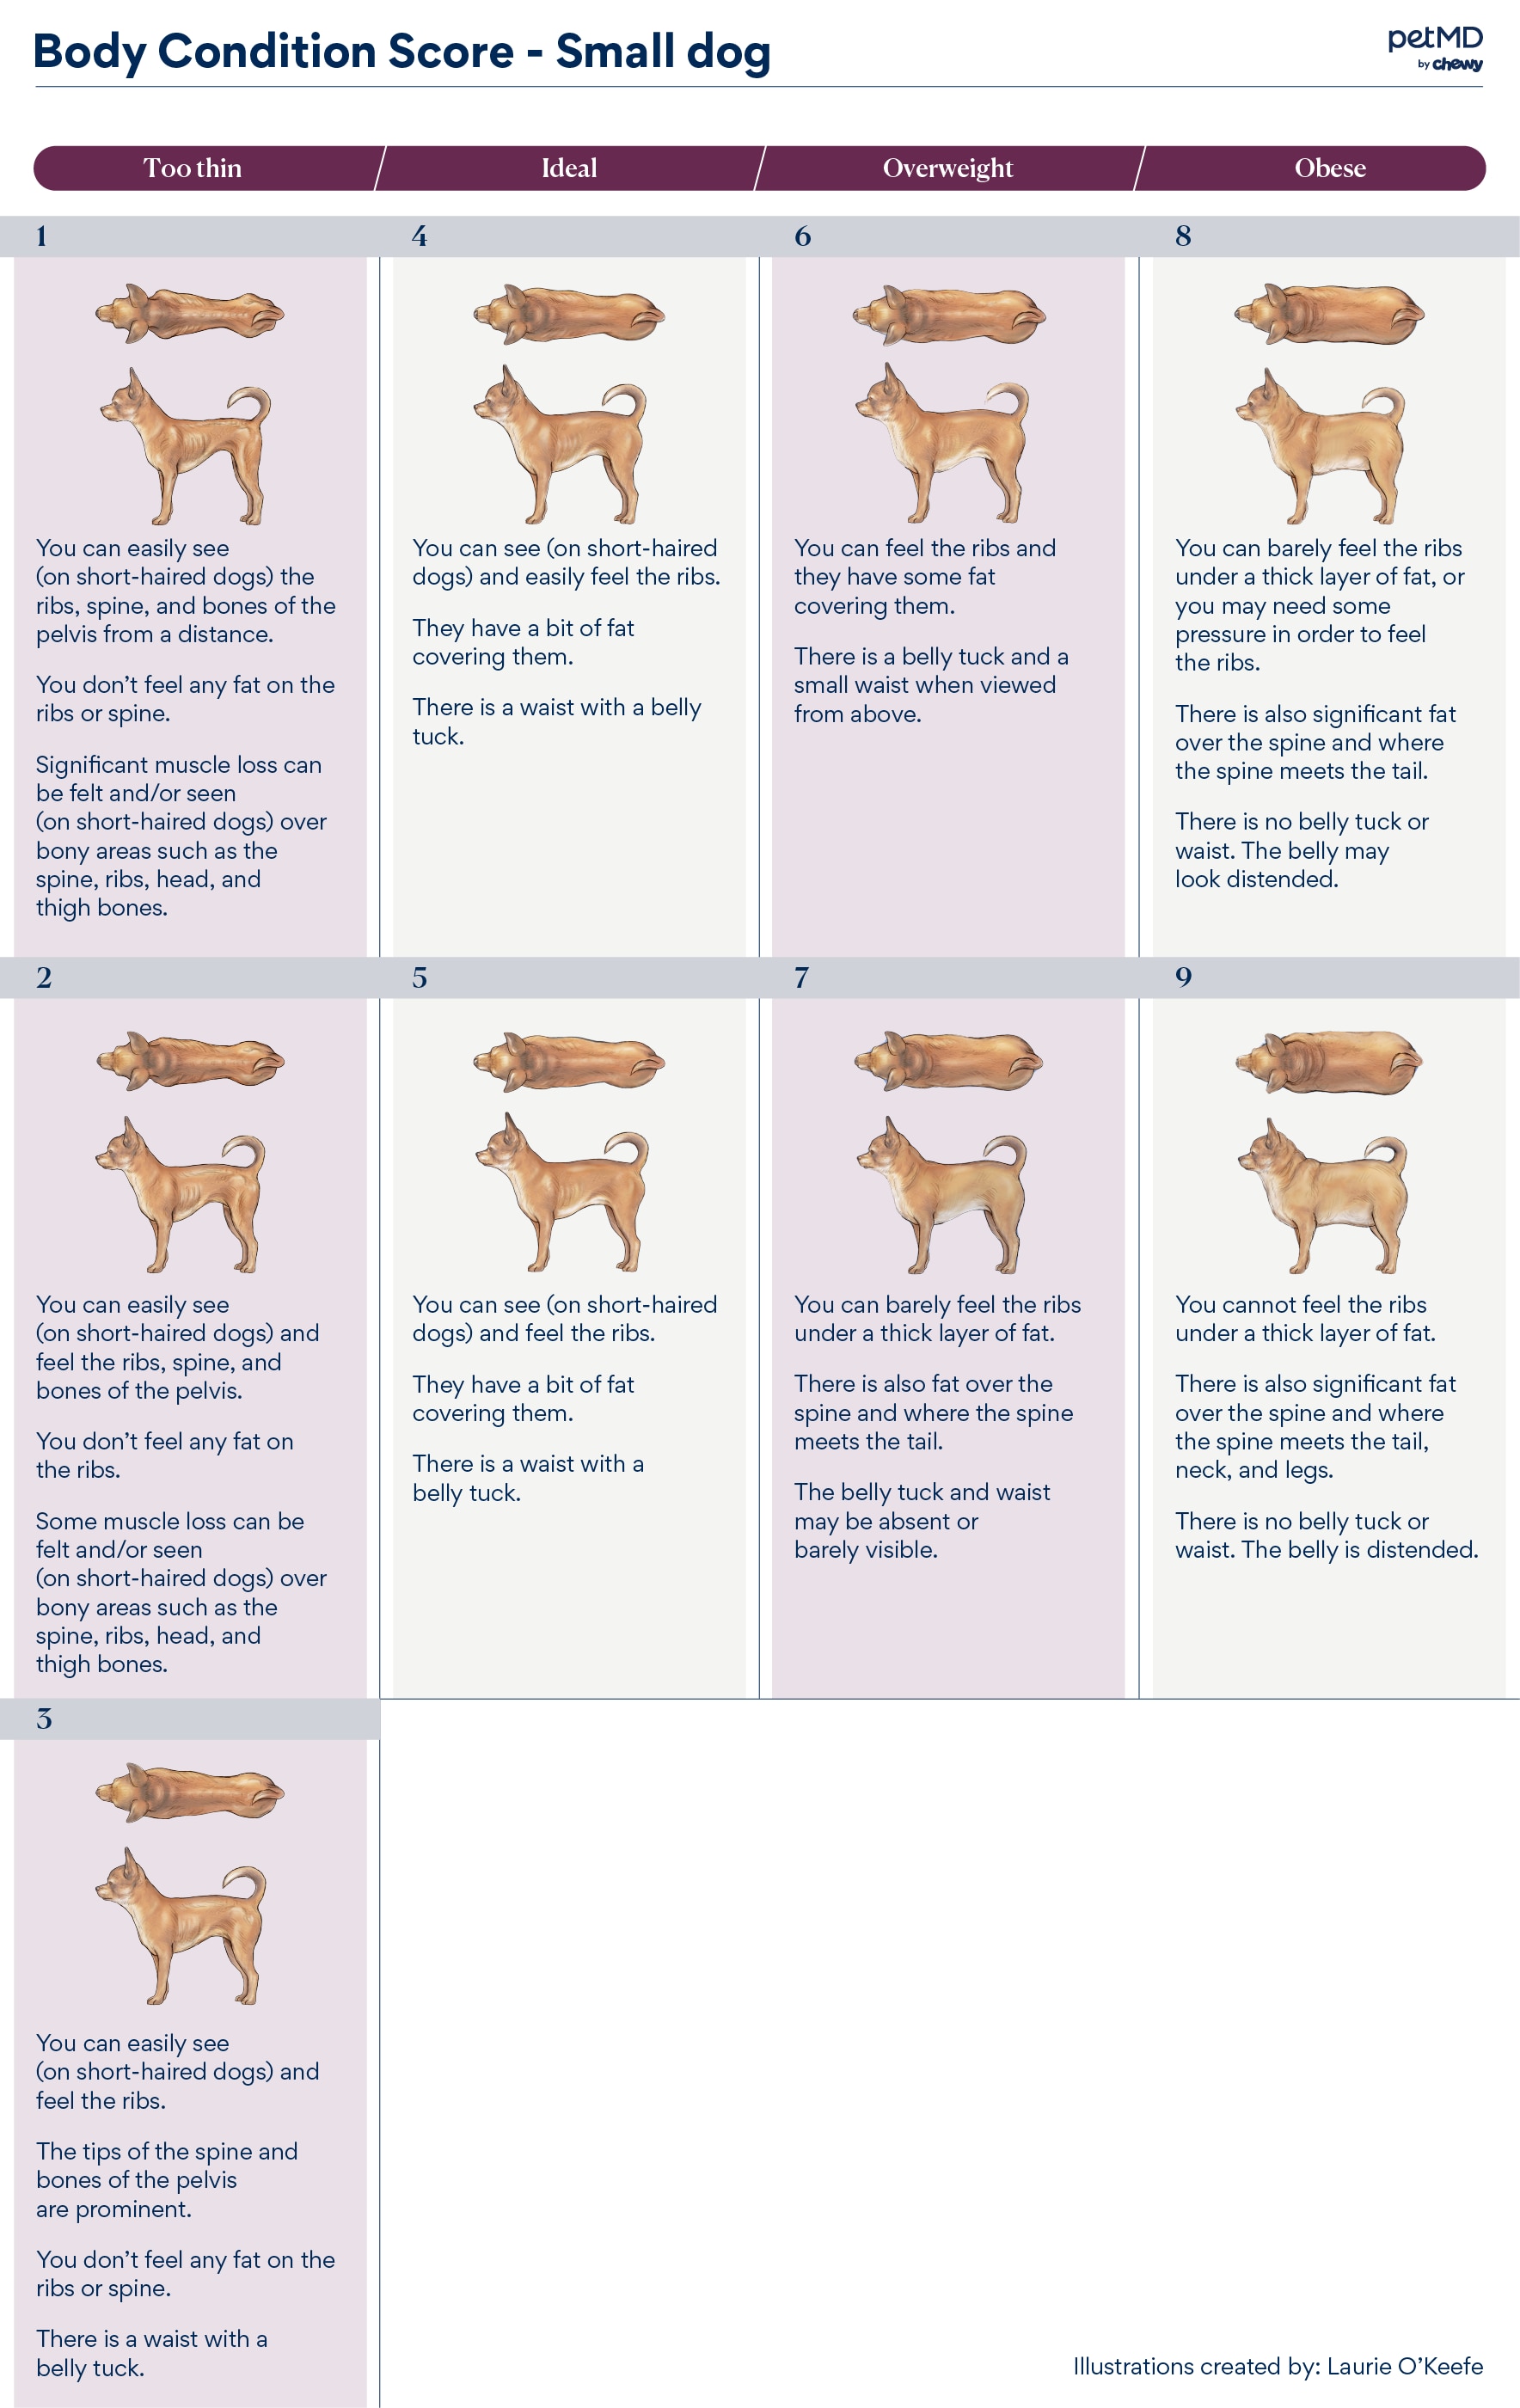 How To Find Your Dogs Body Condition Score Petmd